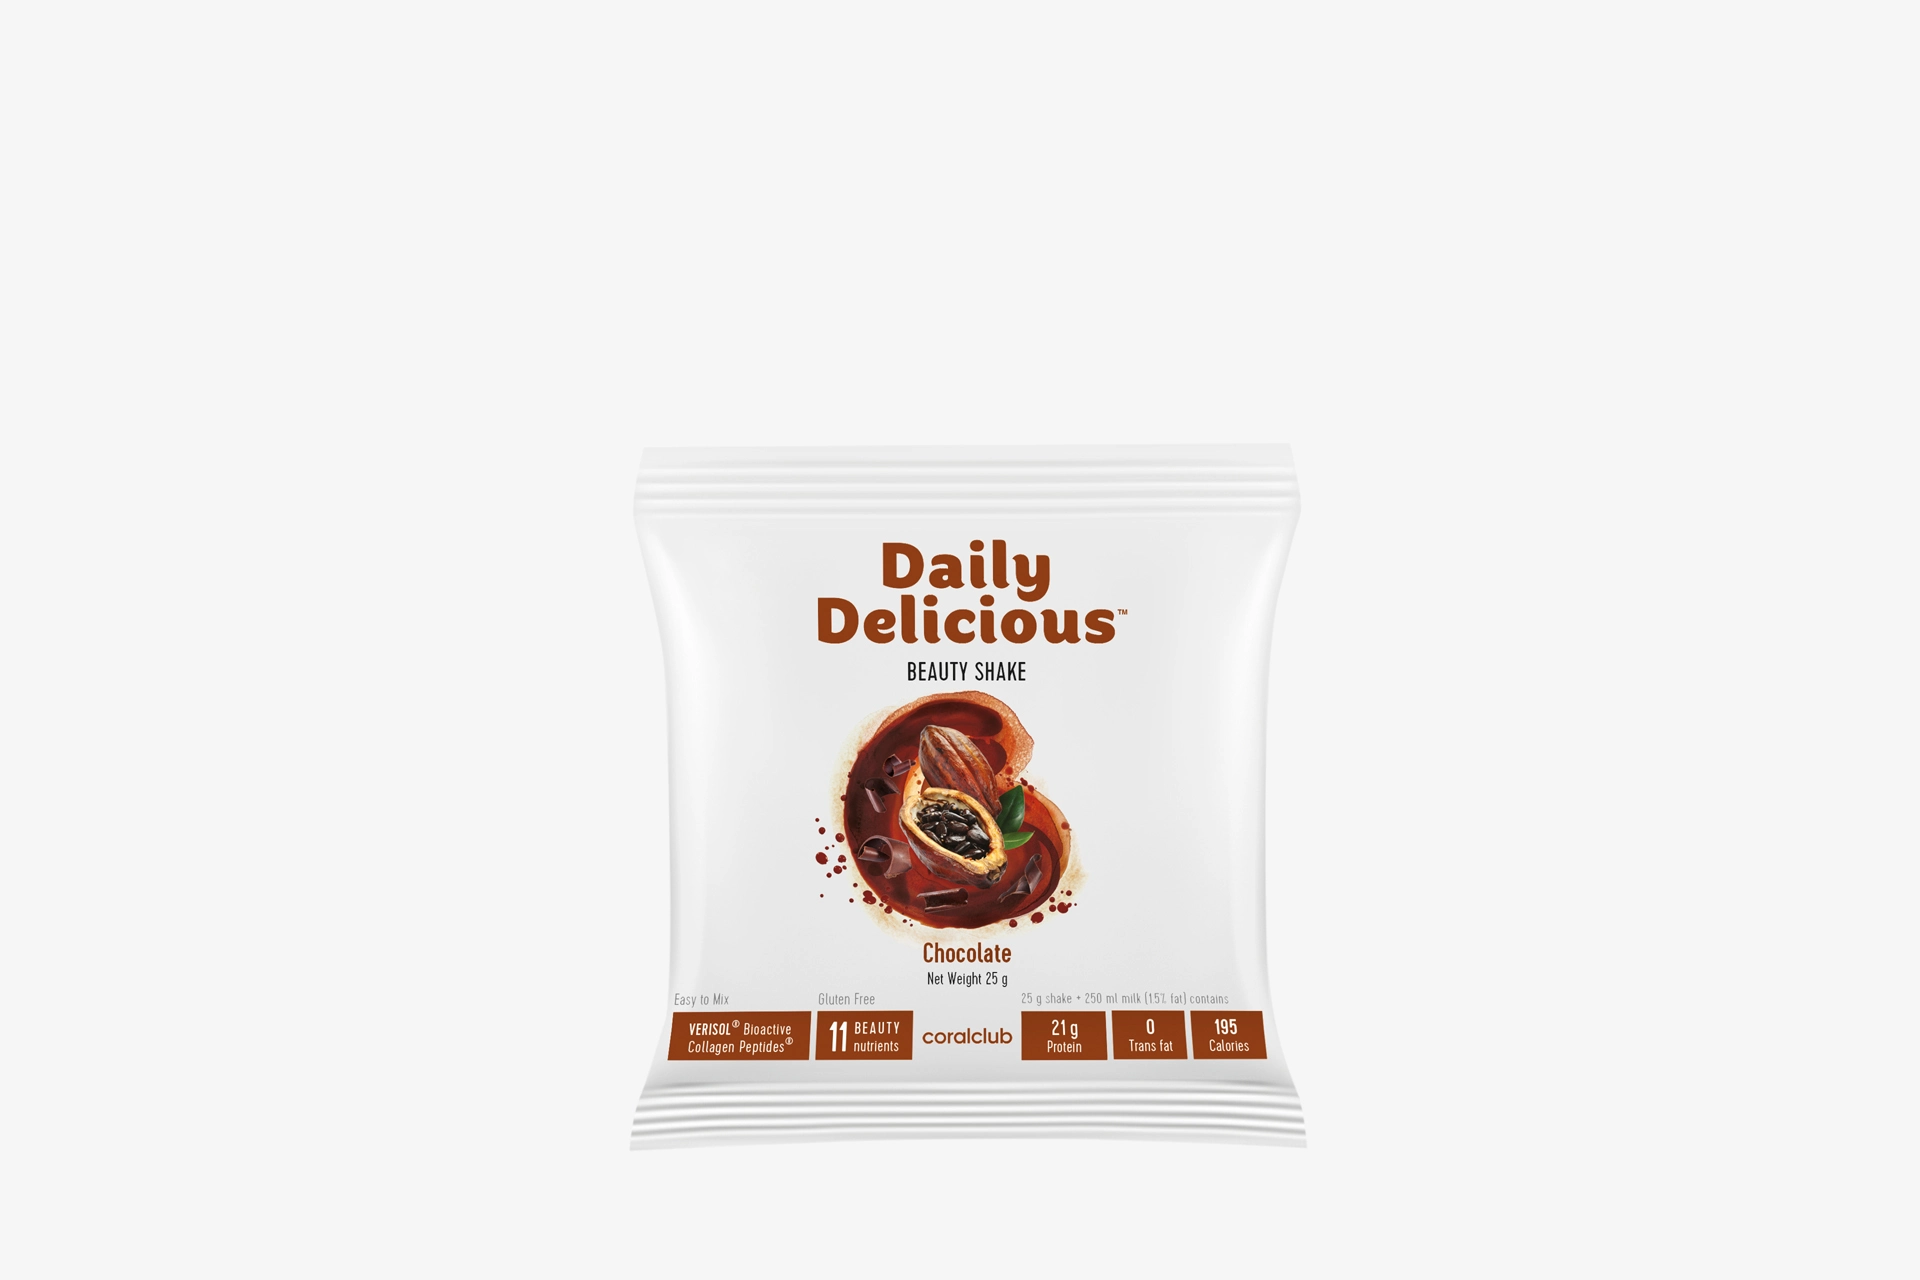 Daily Delicious Beauty Shake, 25 g / 1 portion